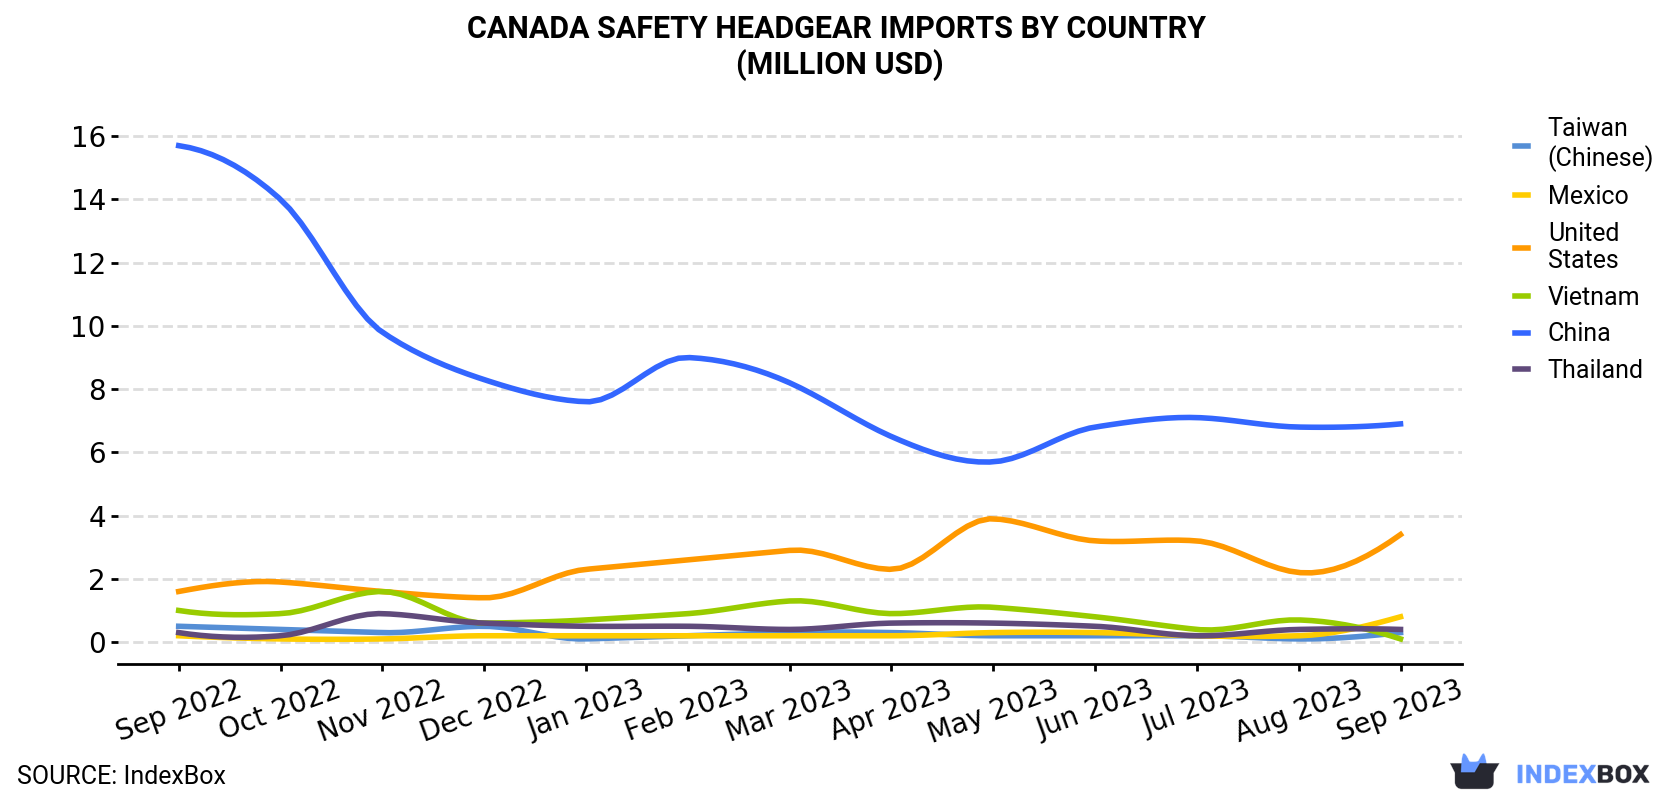 Canada Safety Headgear Imports By Country (Million USD)